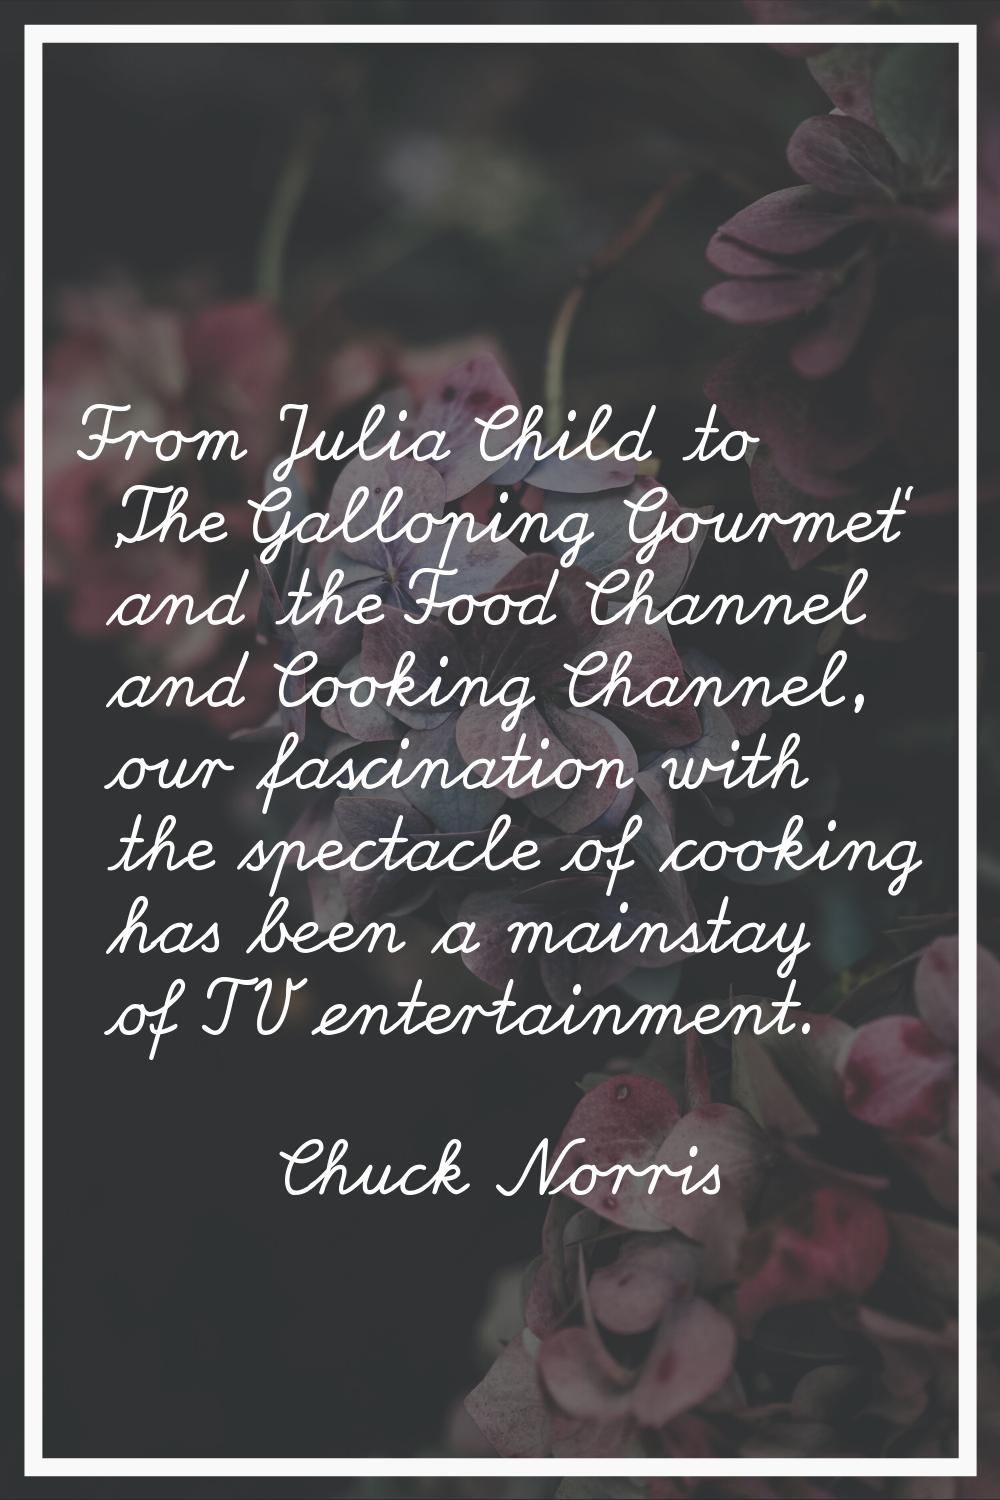 From Julia Child to 'The Galloping Gourmet' and the Food Channel and Cooking Channel, our fascinati